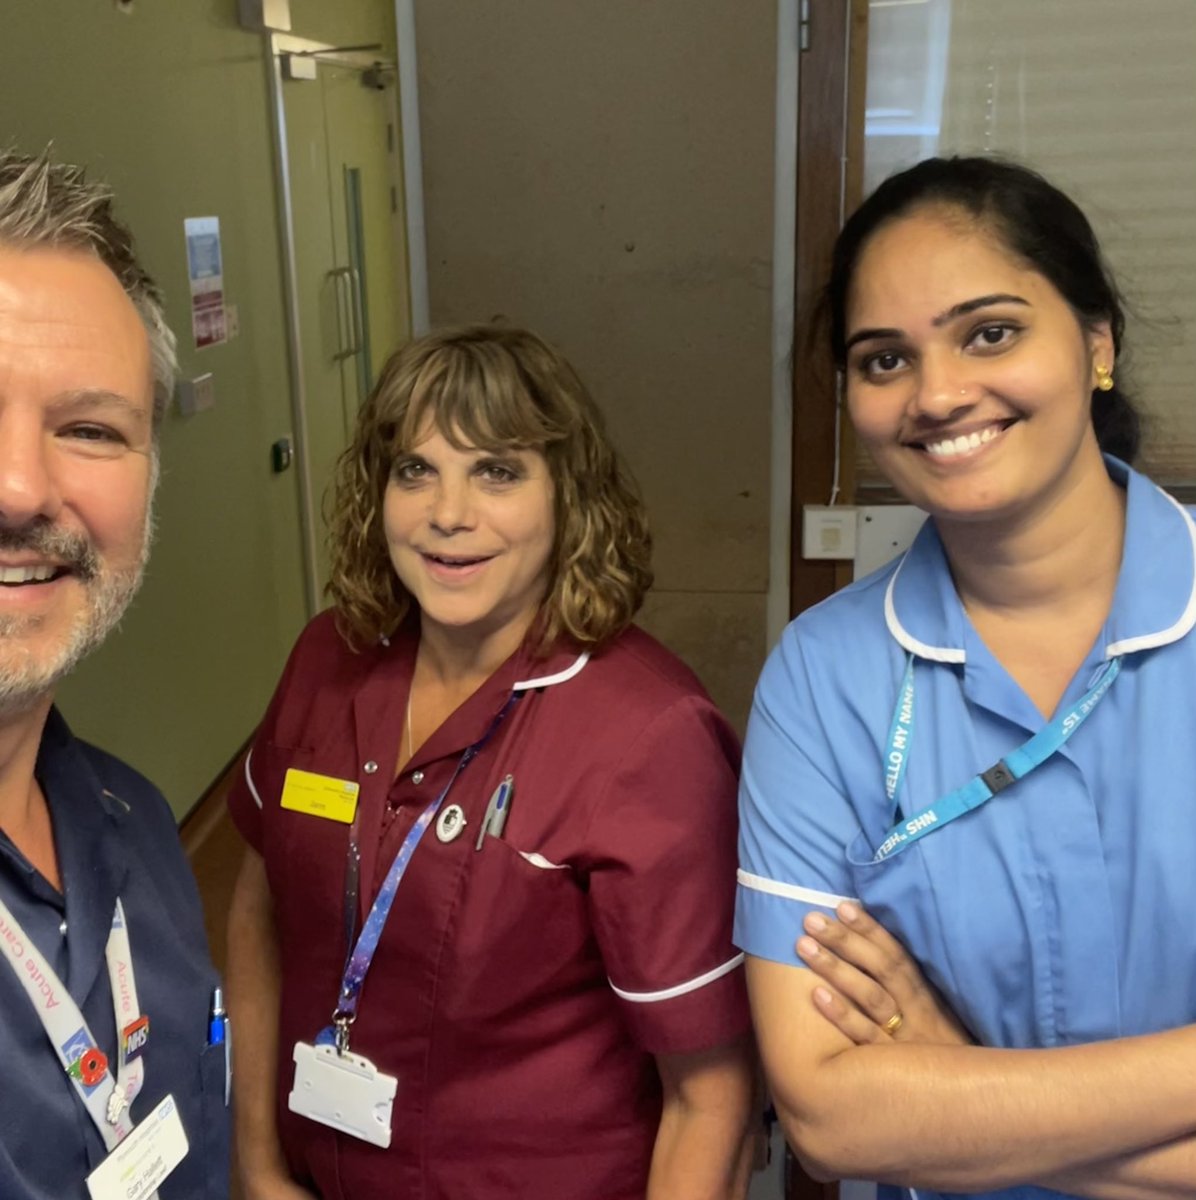 Jovial was one of the 1st @UHPOverseasRec Nurses to join @UHP_NHS

This week @JaneTassart & I welcomed Jovial to the @Precept_UHP & OSCE education team as an #OSCE trainer. She is already a hit with the new IR cohort. #SmashingIt 

@BevAllingham @lenny_byrne @jackiew66309222